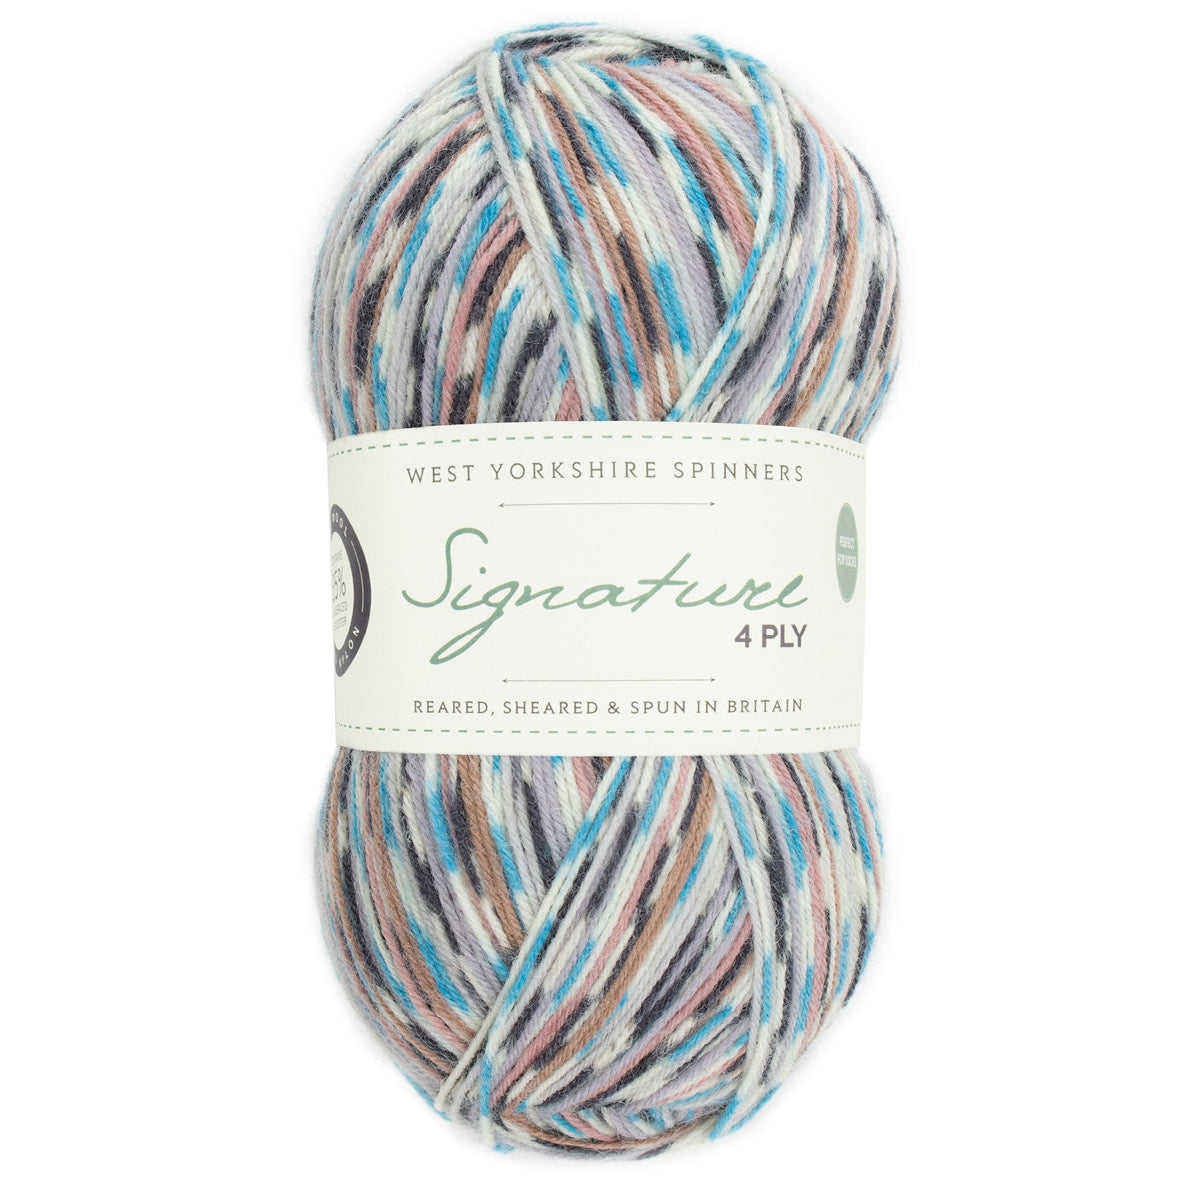 West Yorkshire Spinners Signature 4ply - Country Birds Range